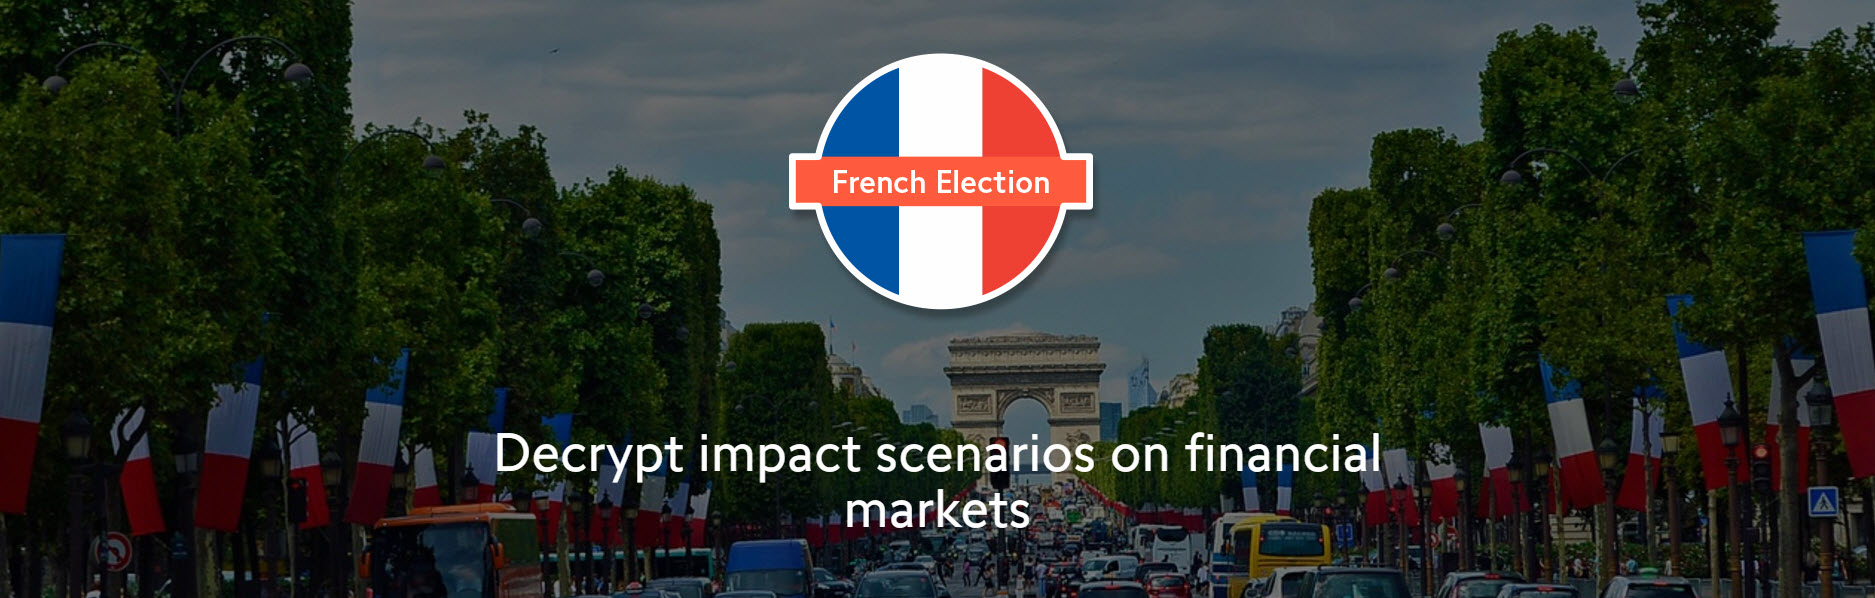 french election effecct on forex market